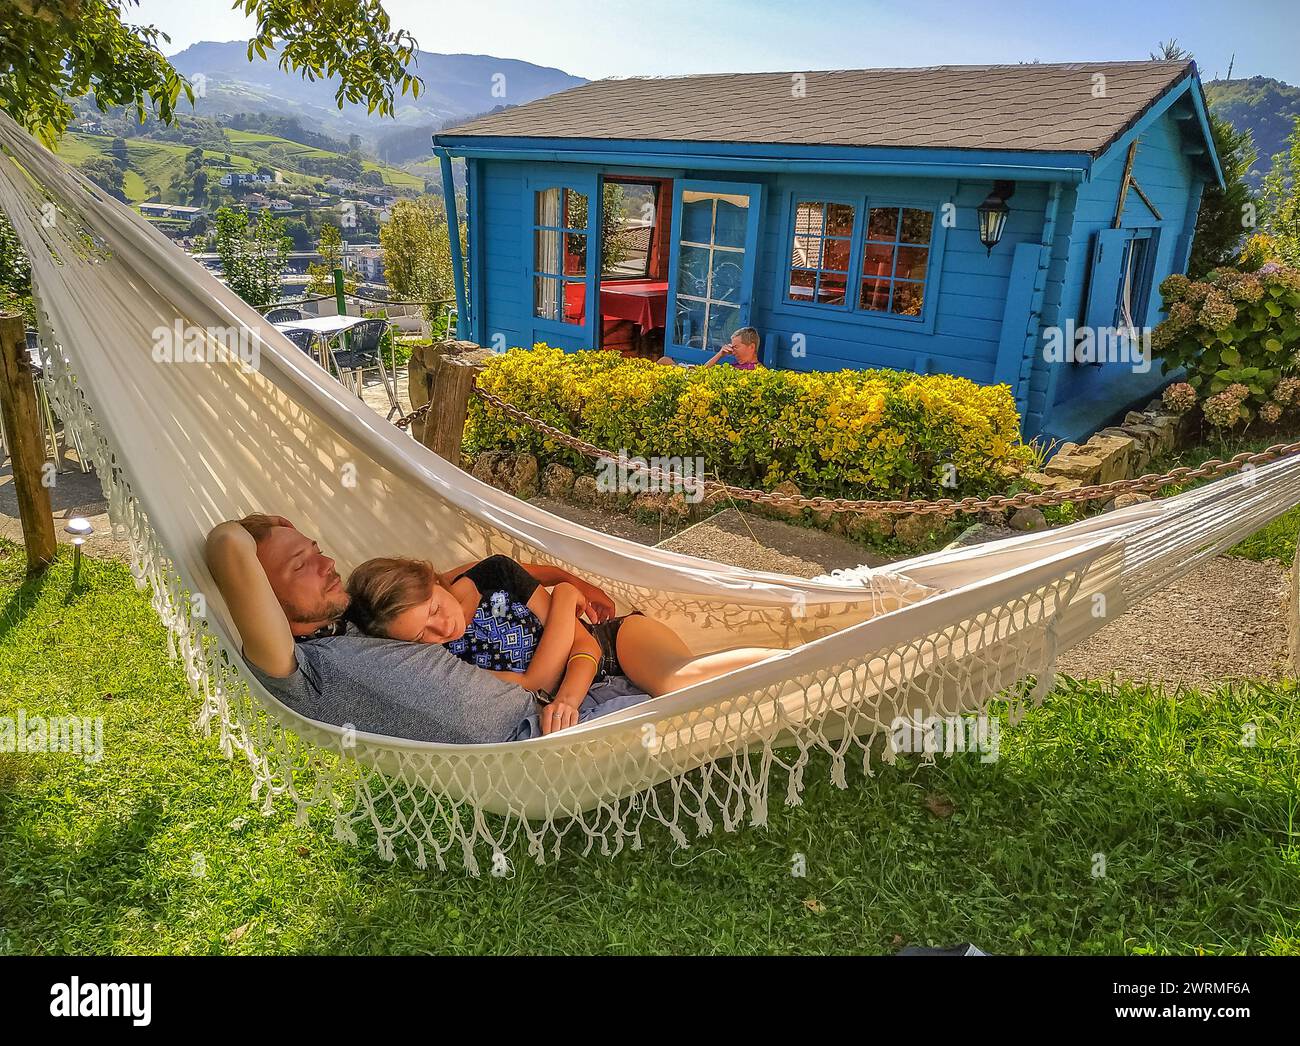 Couple sleeping in hammock on backyard. Quiet hour in french village. Man and woman having rest on rural landscape background. Peaceful moment. Stock Photo